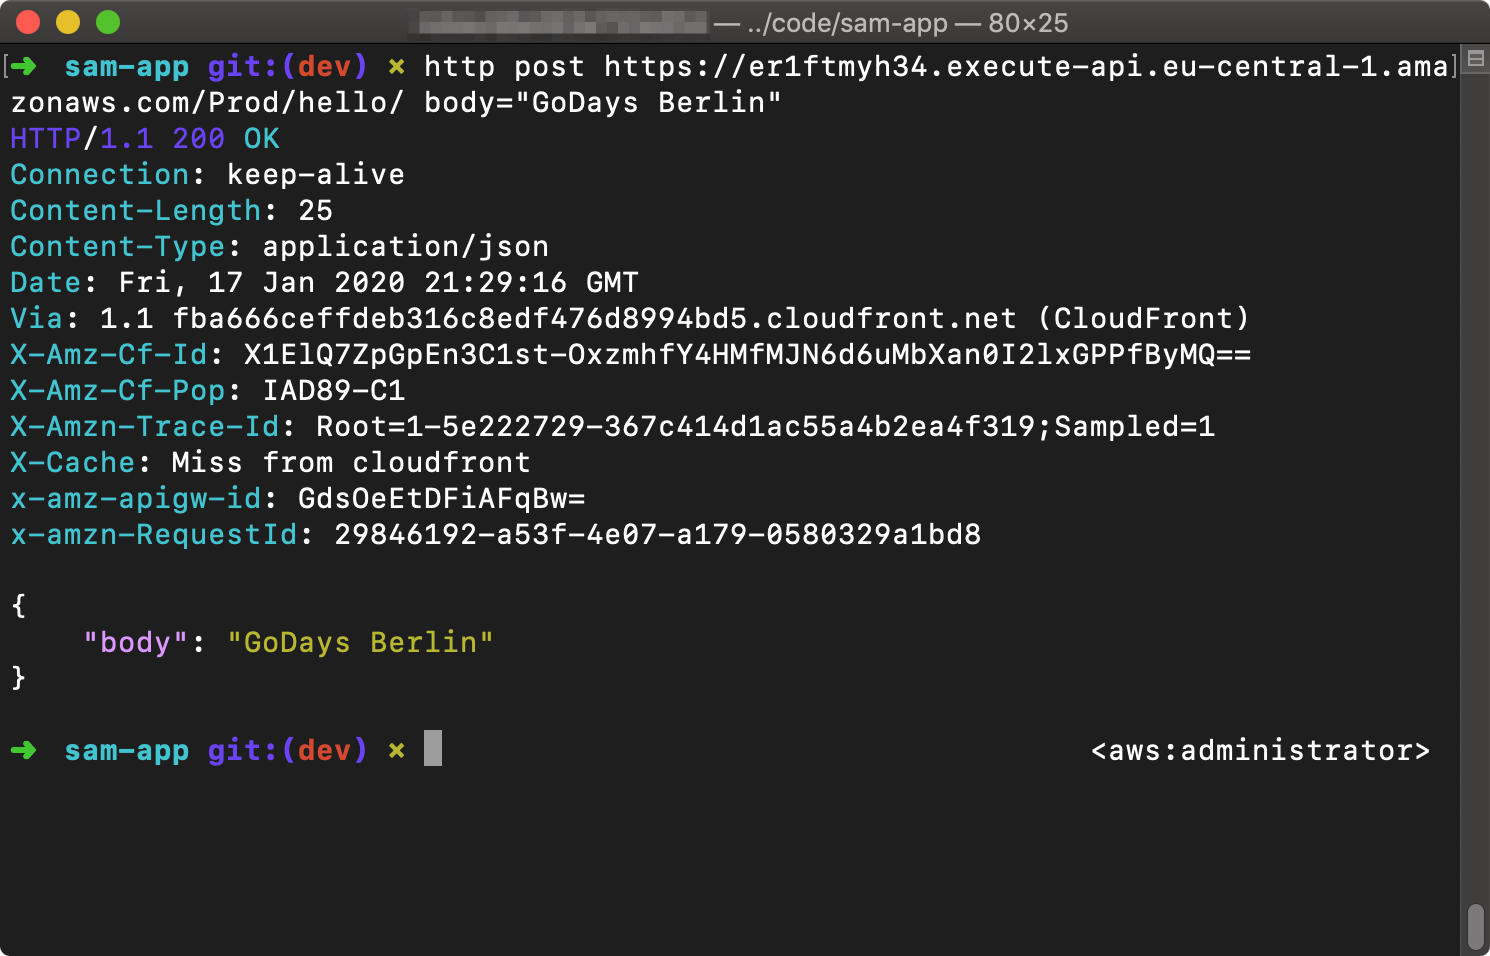 Terminal showing results of 'http post' command.